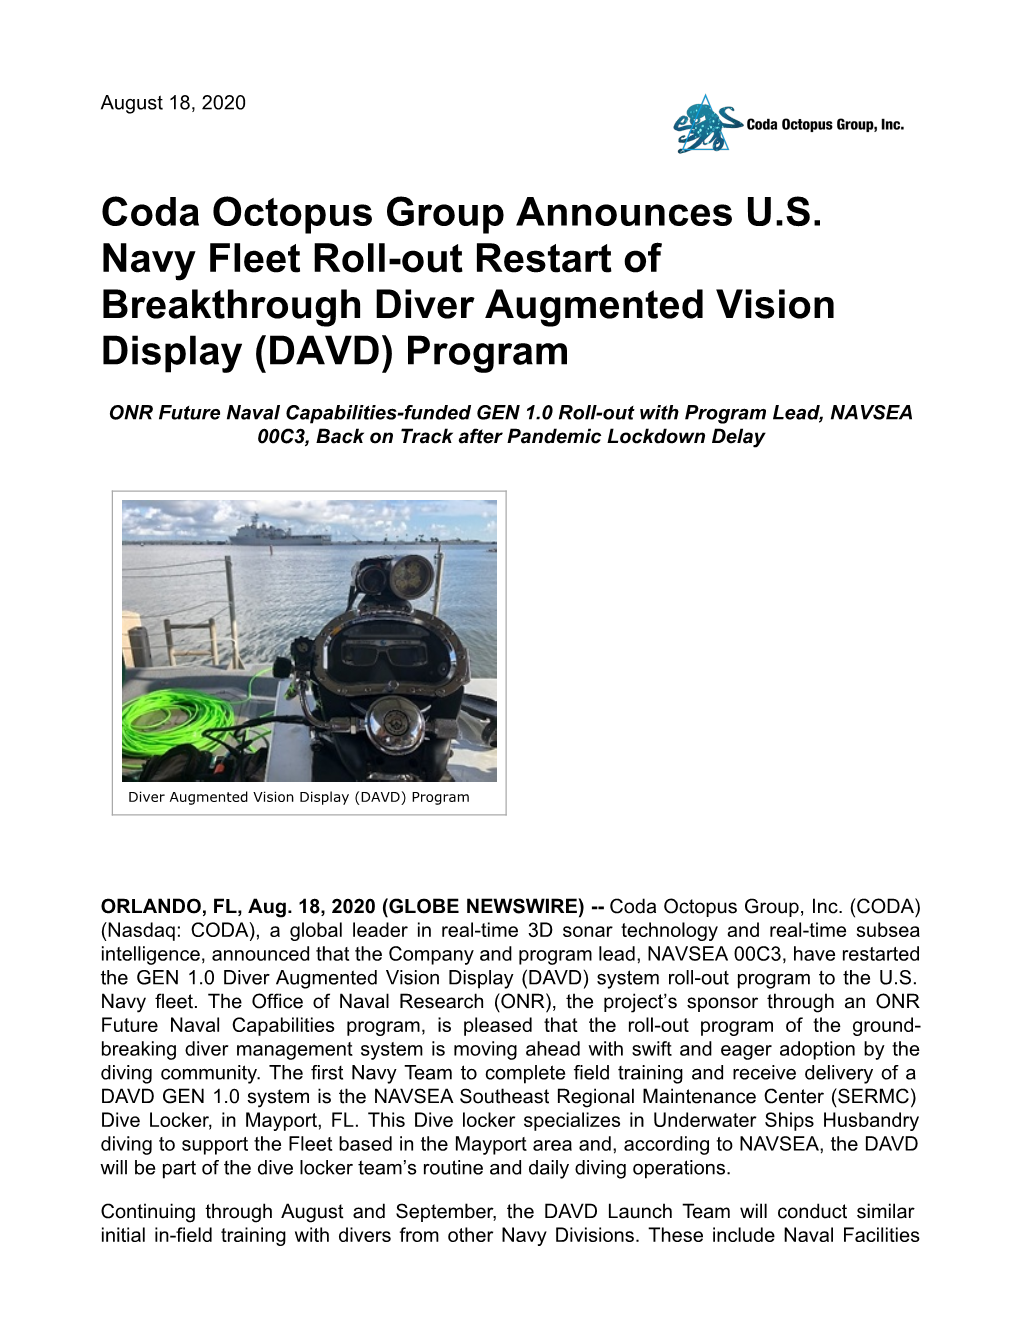 Coda Octopus Group Announces US Navy Fleet Roll-Out Restart of Breakthrough Diver Augmented Vision Display